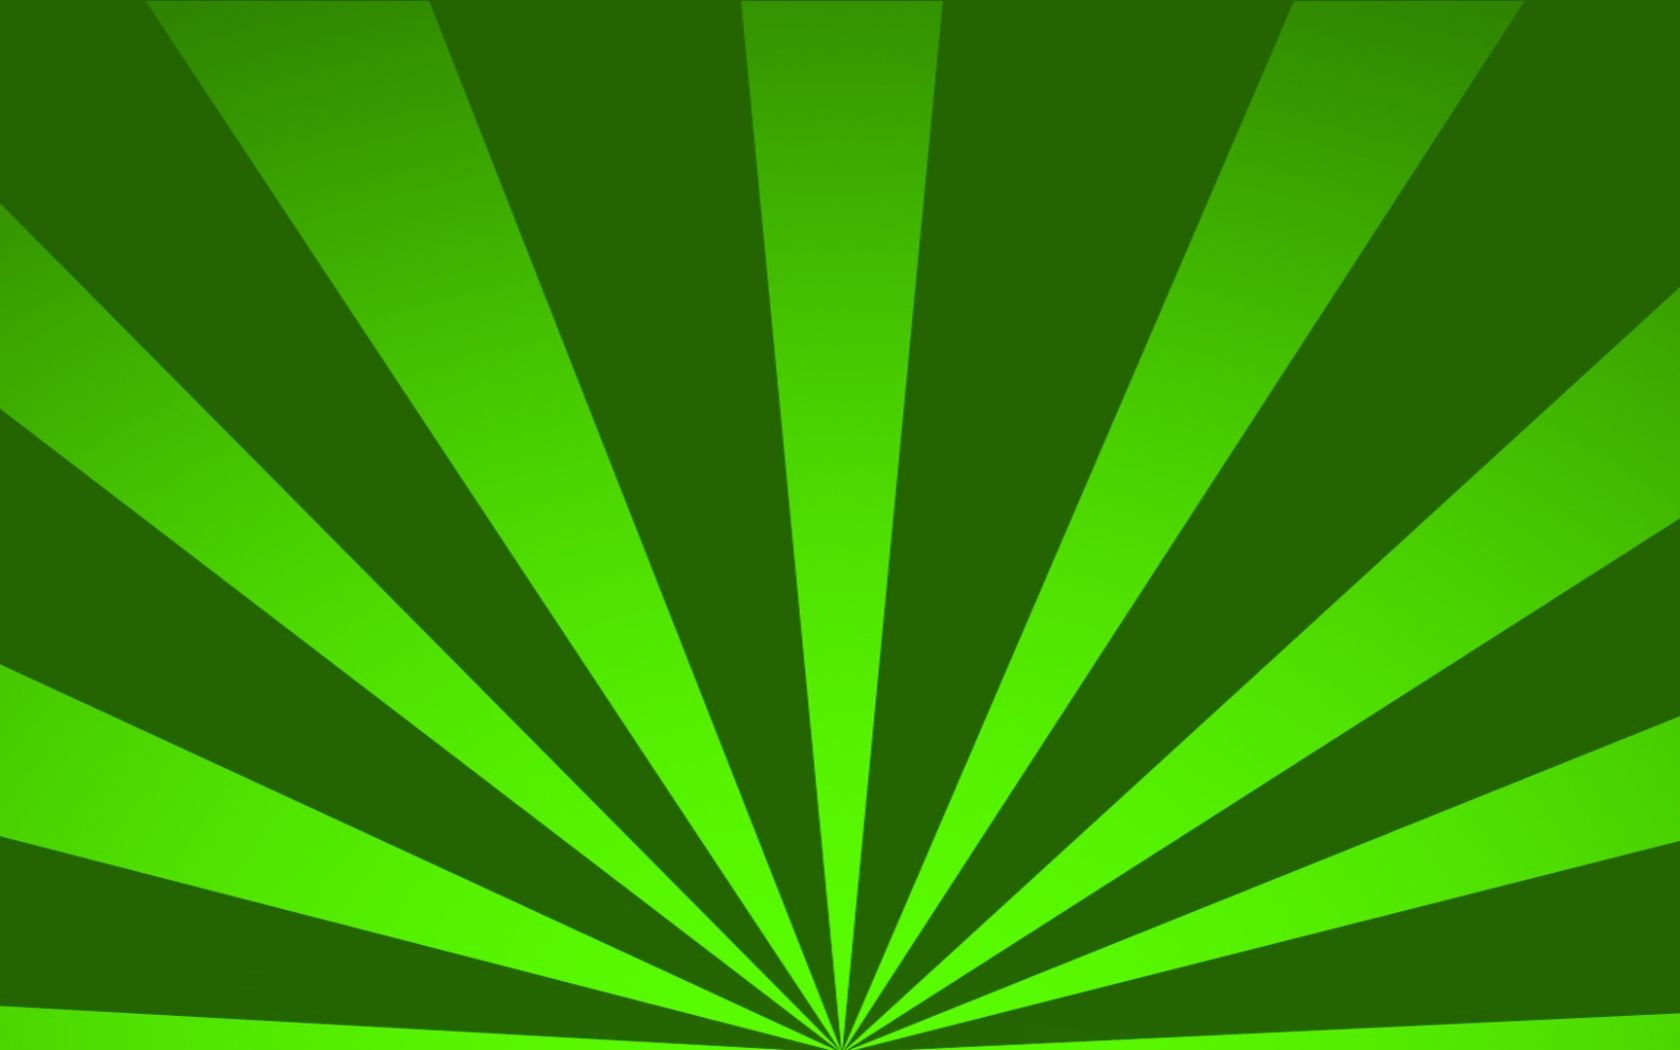 Free download to use Background 1080p Green Sun Ray